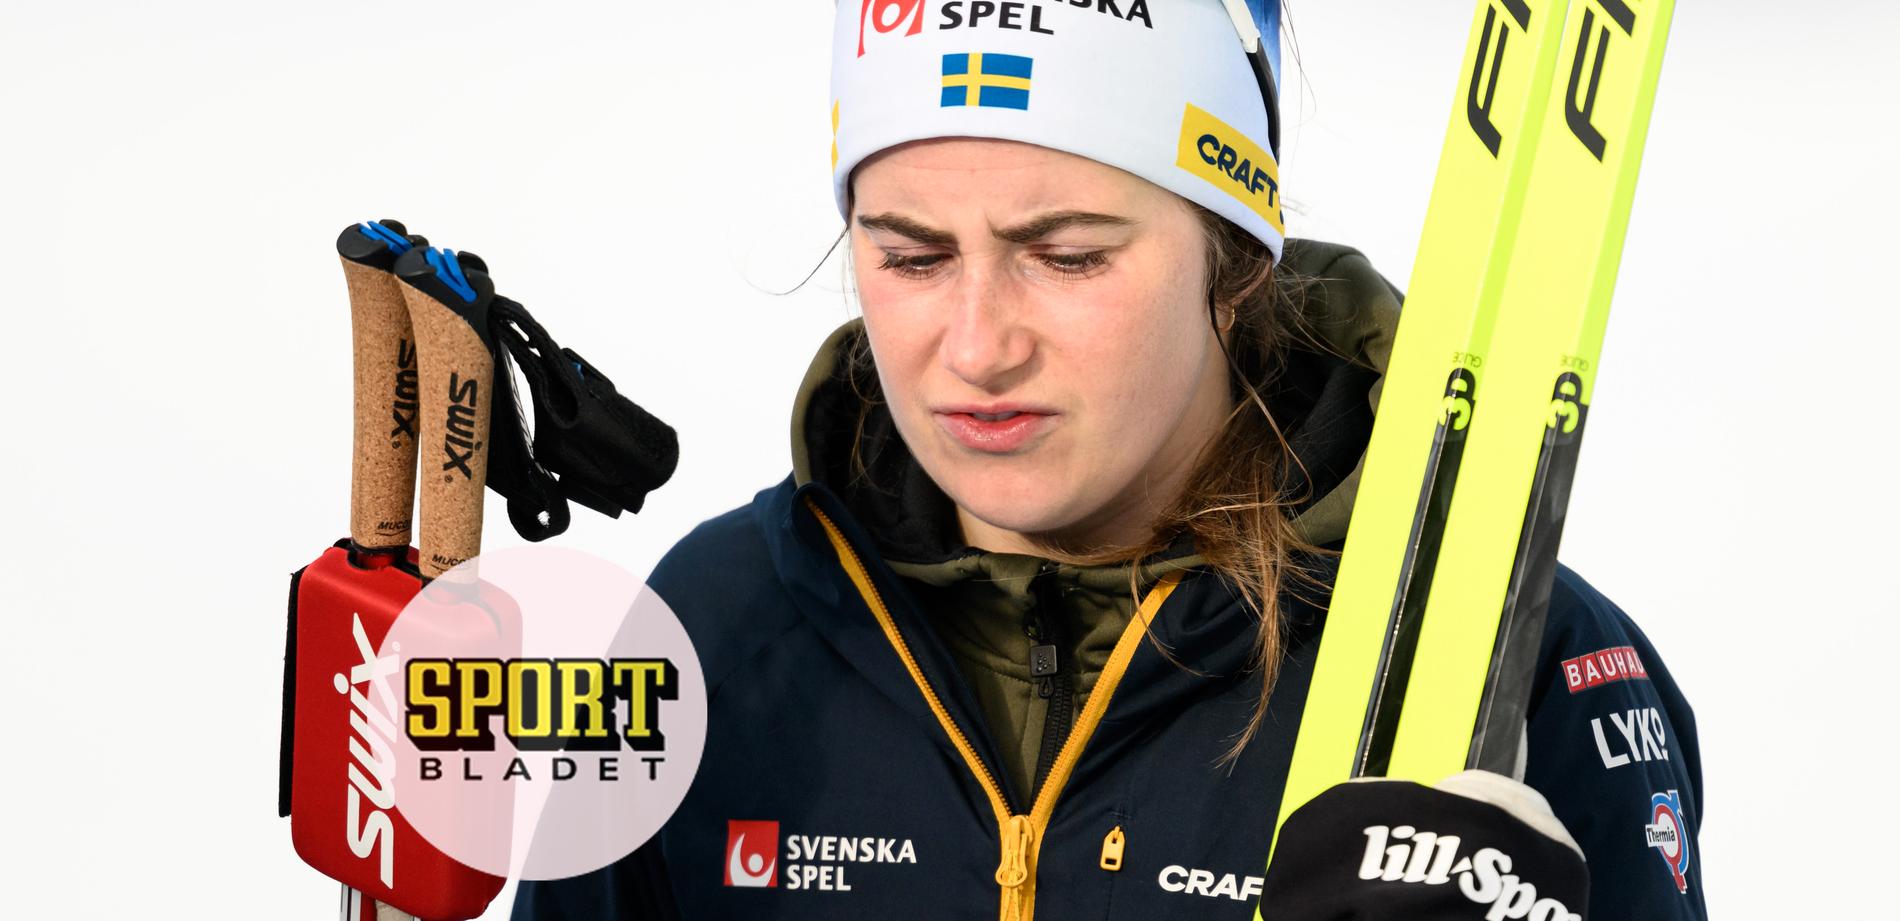 Swedish Skier Ebba Andersson Withdraws from Tour de Ski Due to Illness